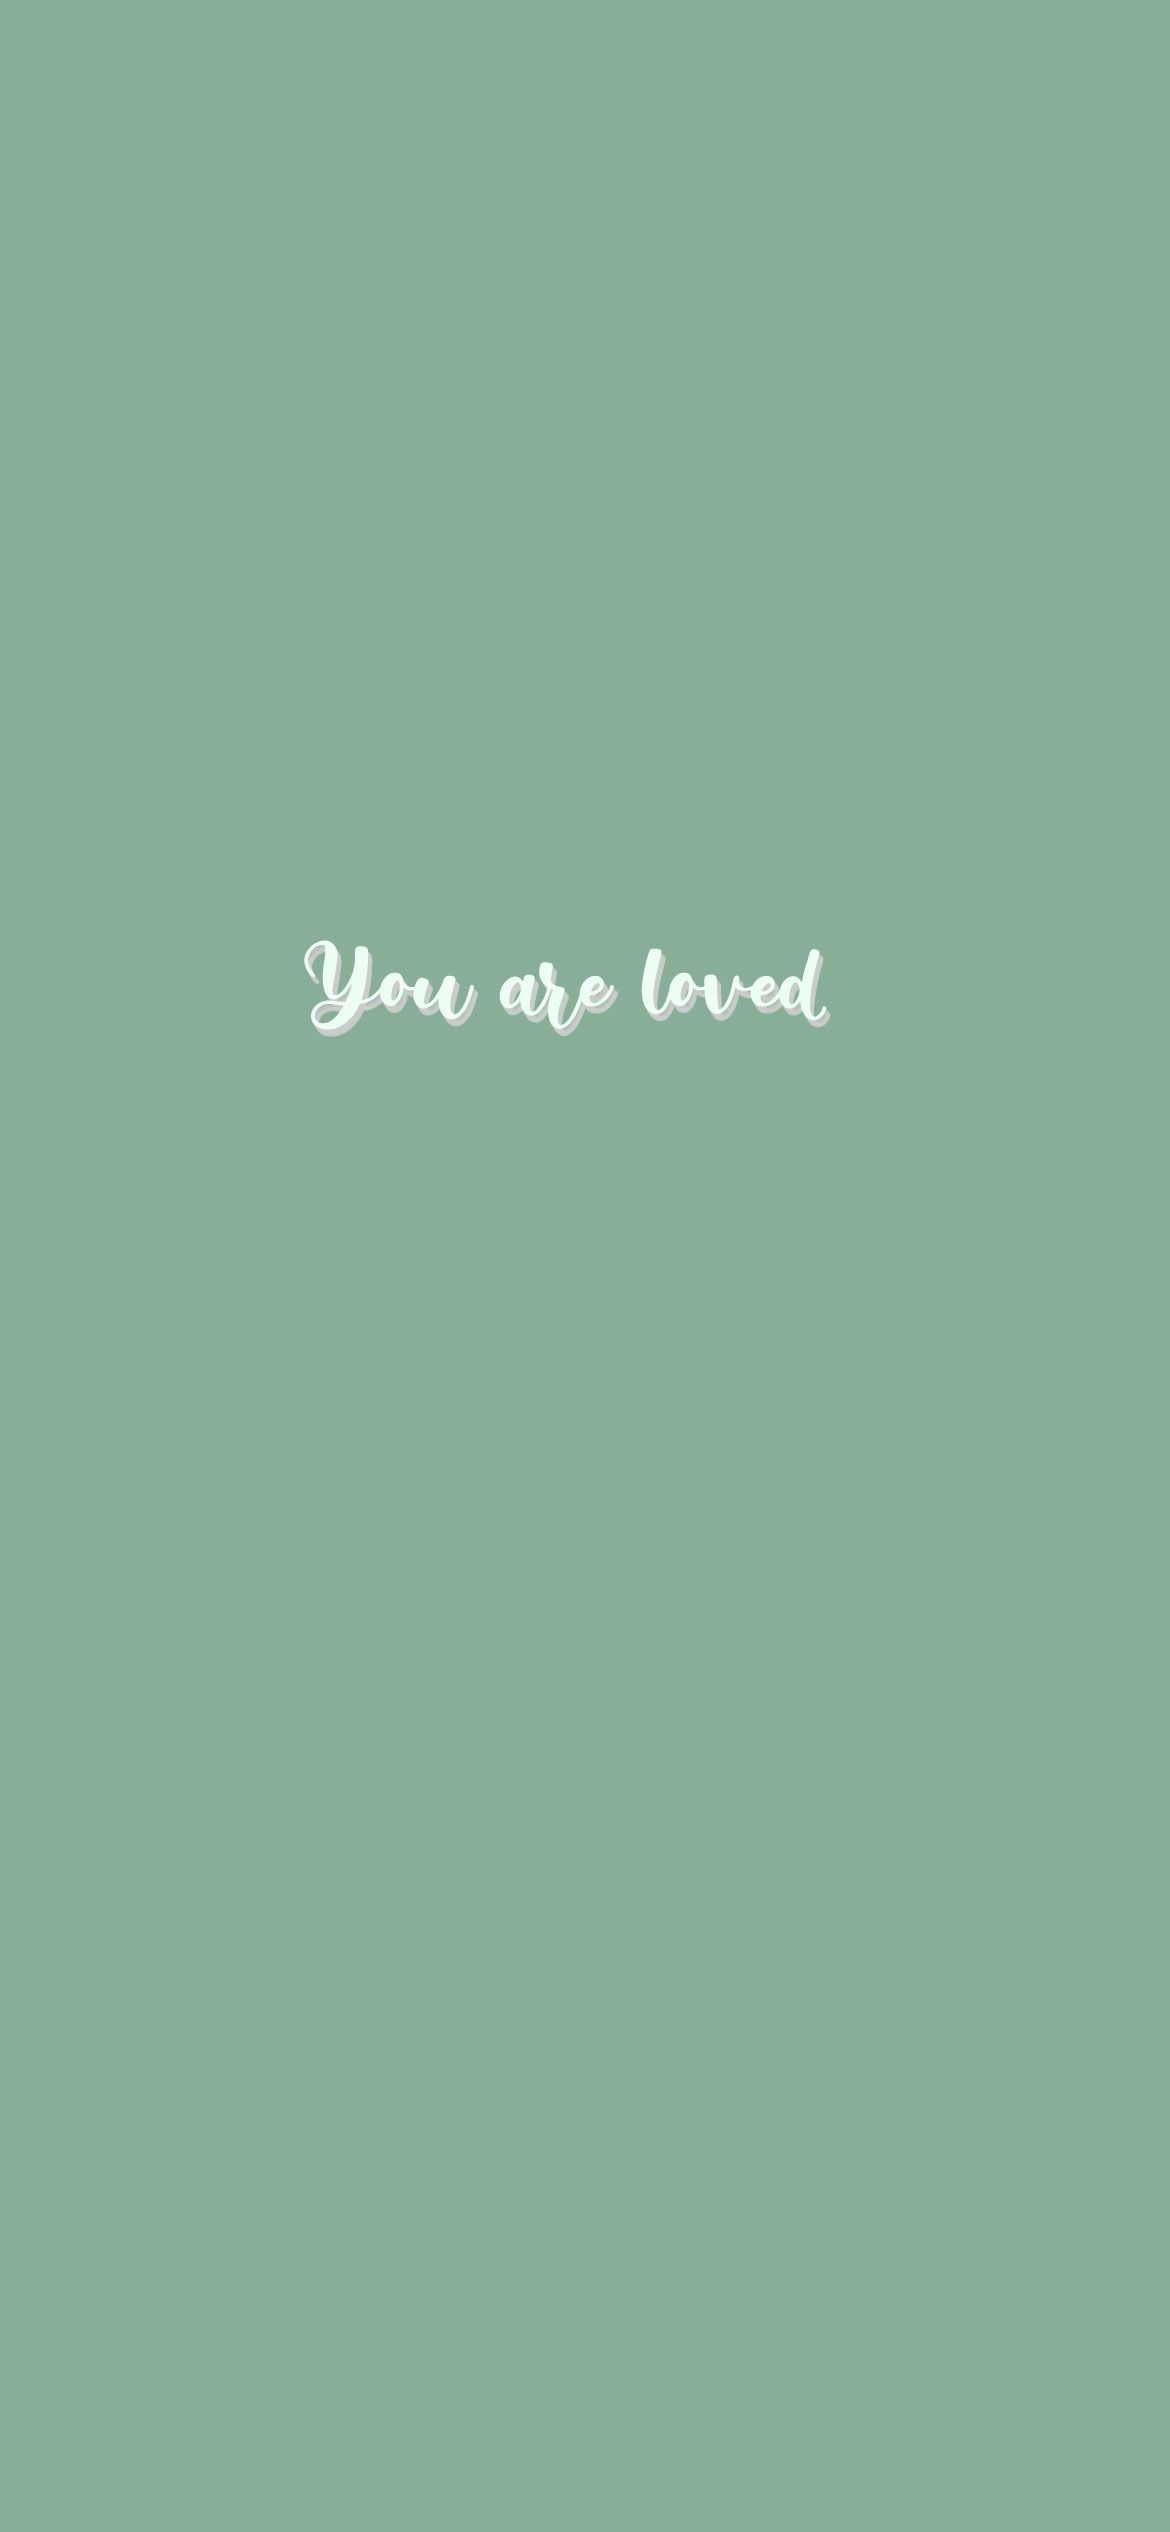 You are loved. - Sage green, green